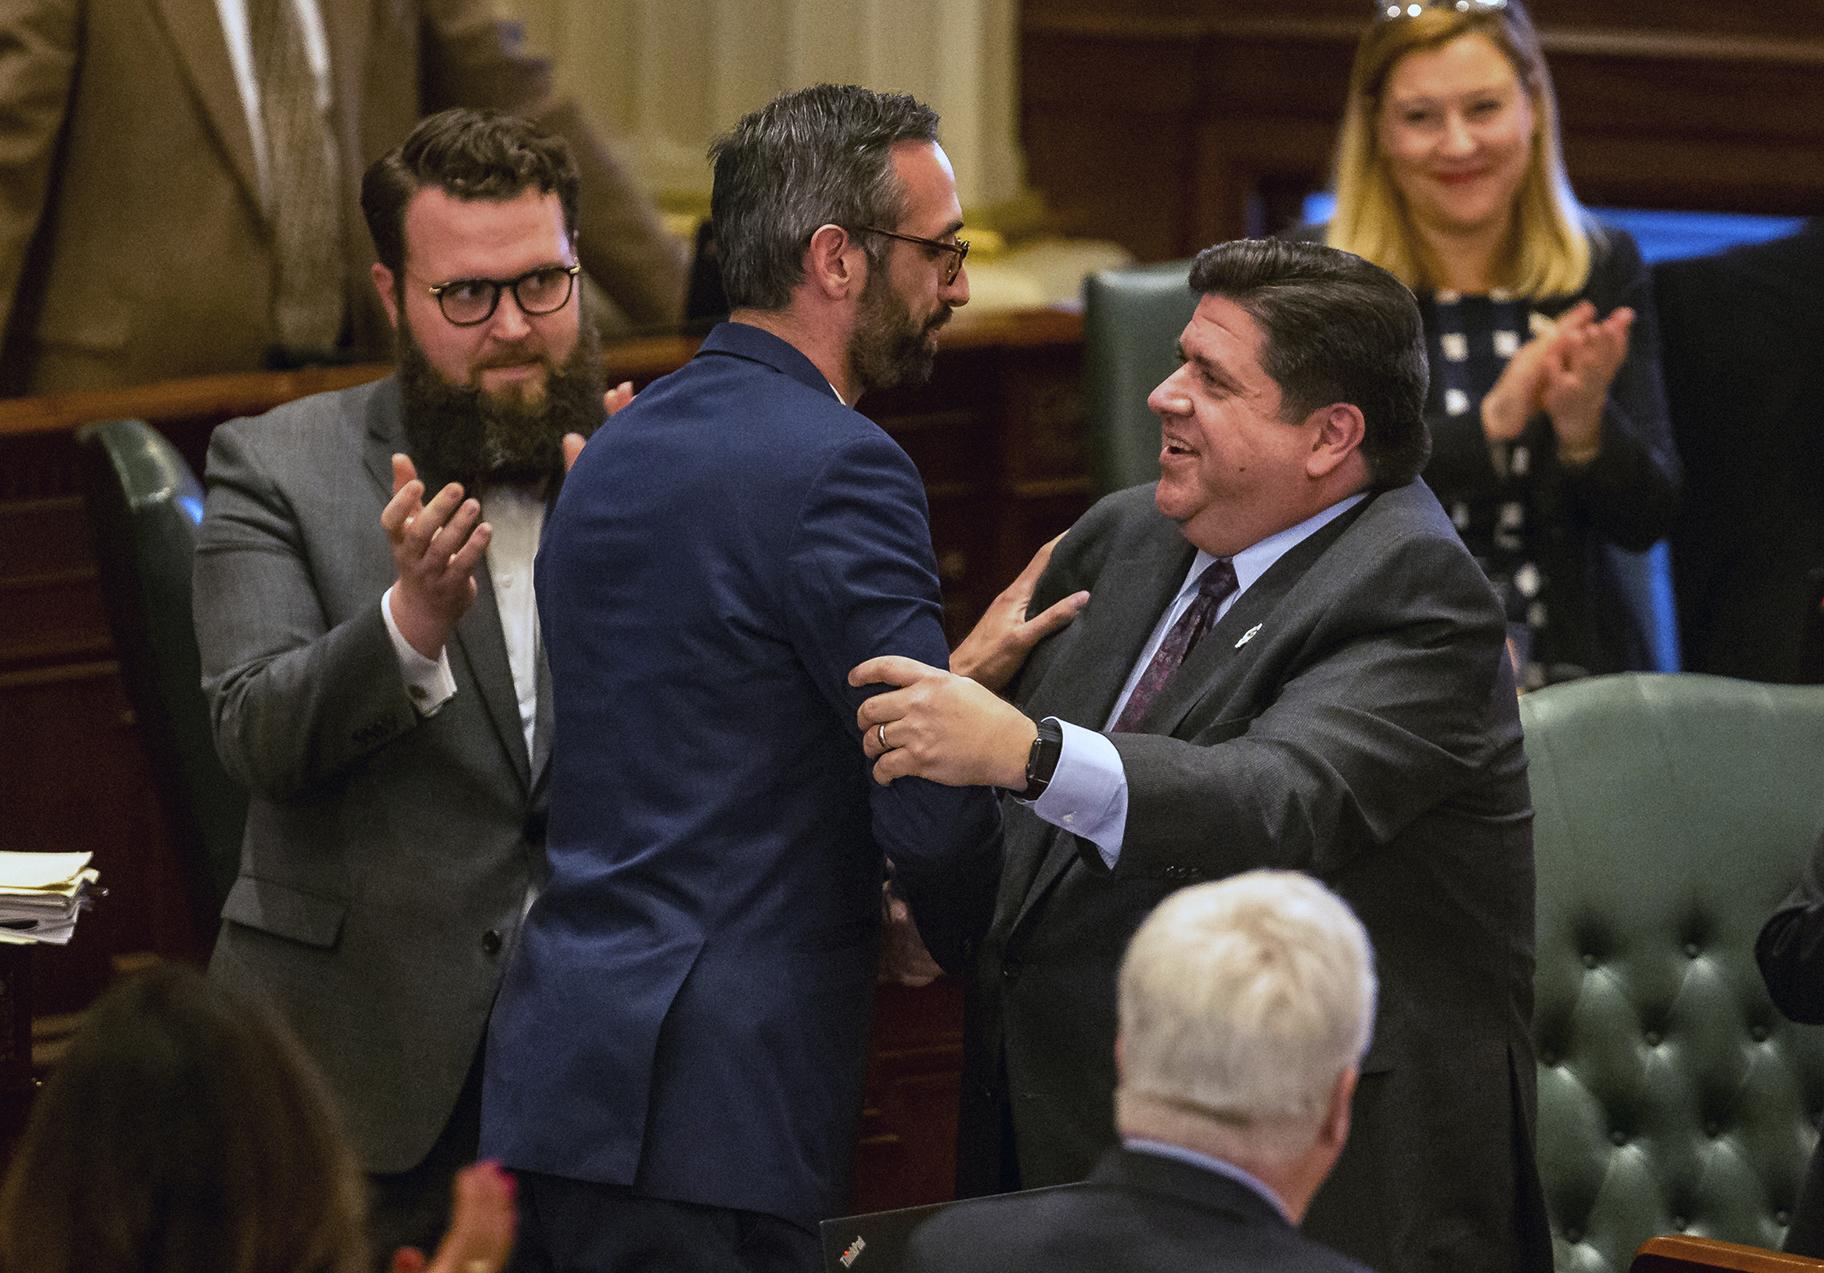 Gov. J.B. Pritzker, right, congratulates state Rep. Will Guzzardi, D-Chicago, left, on the House floor at the Illinois State Capitol on Thursday, Feb. 14, 2019. (Justin L. Fowler / The State Journal-Register via AP)